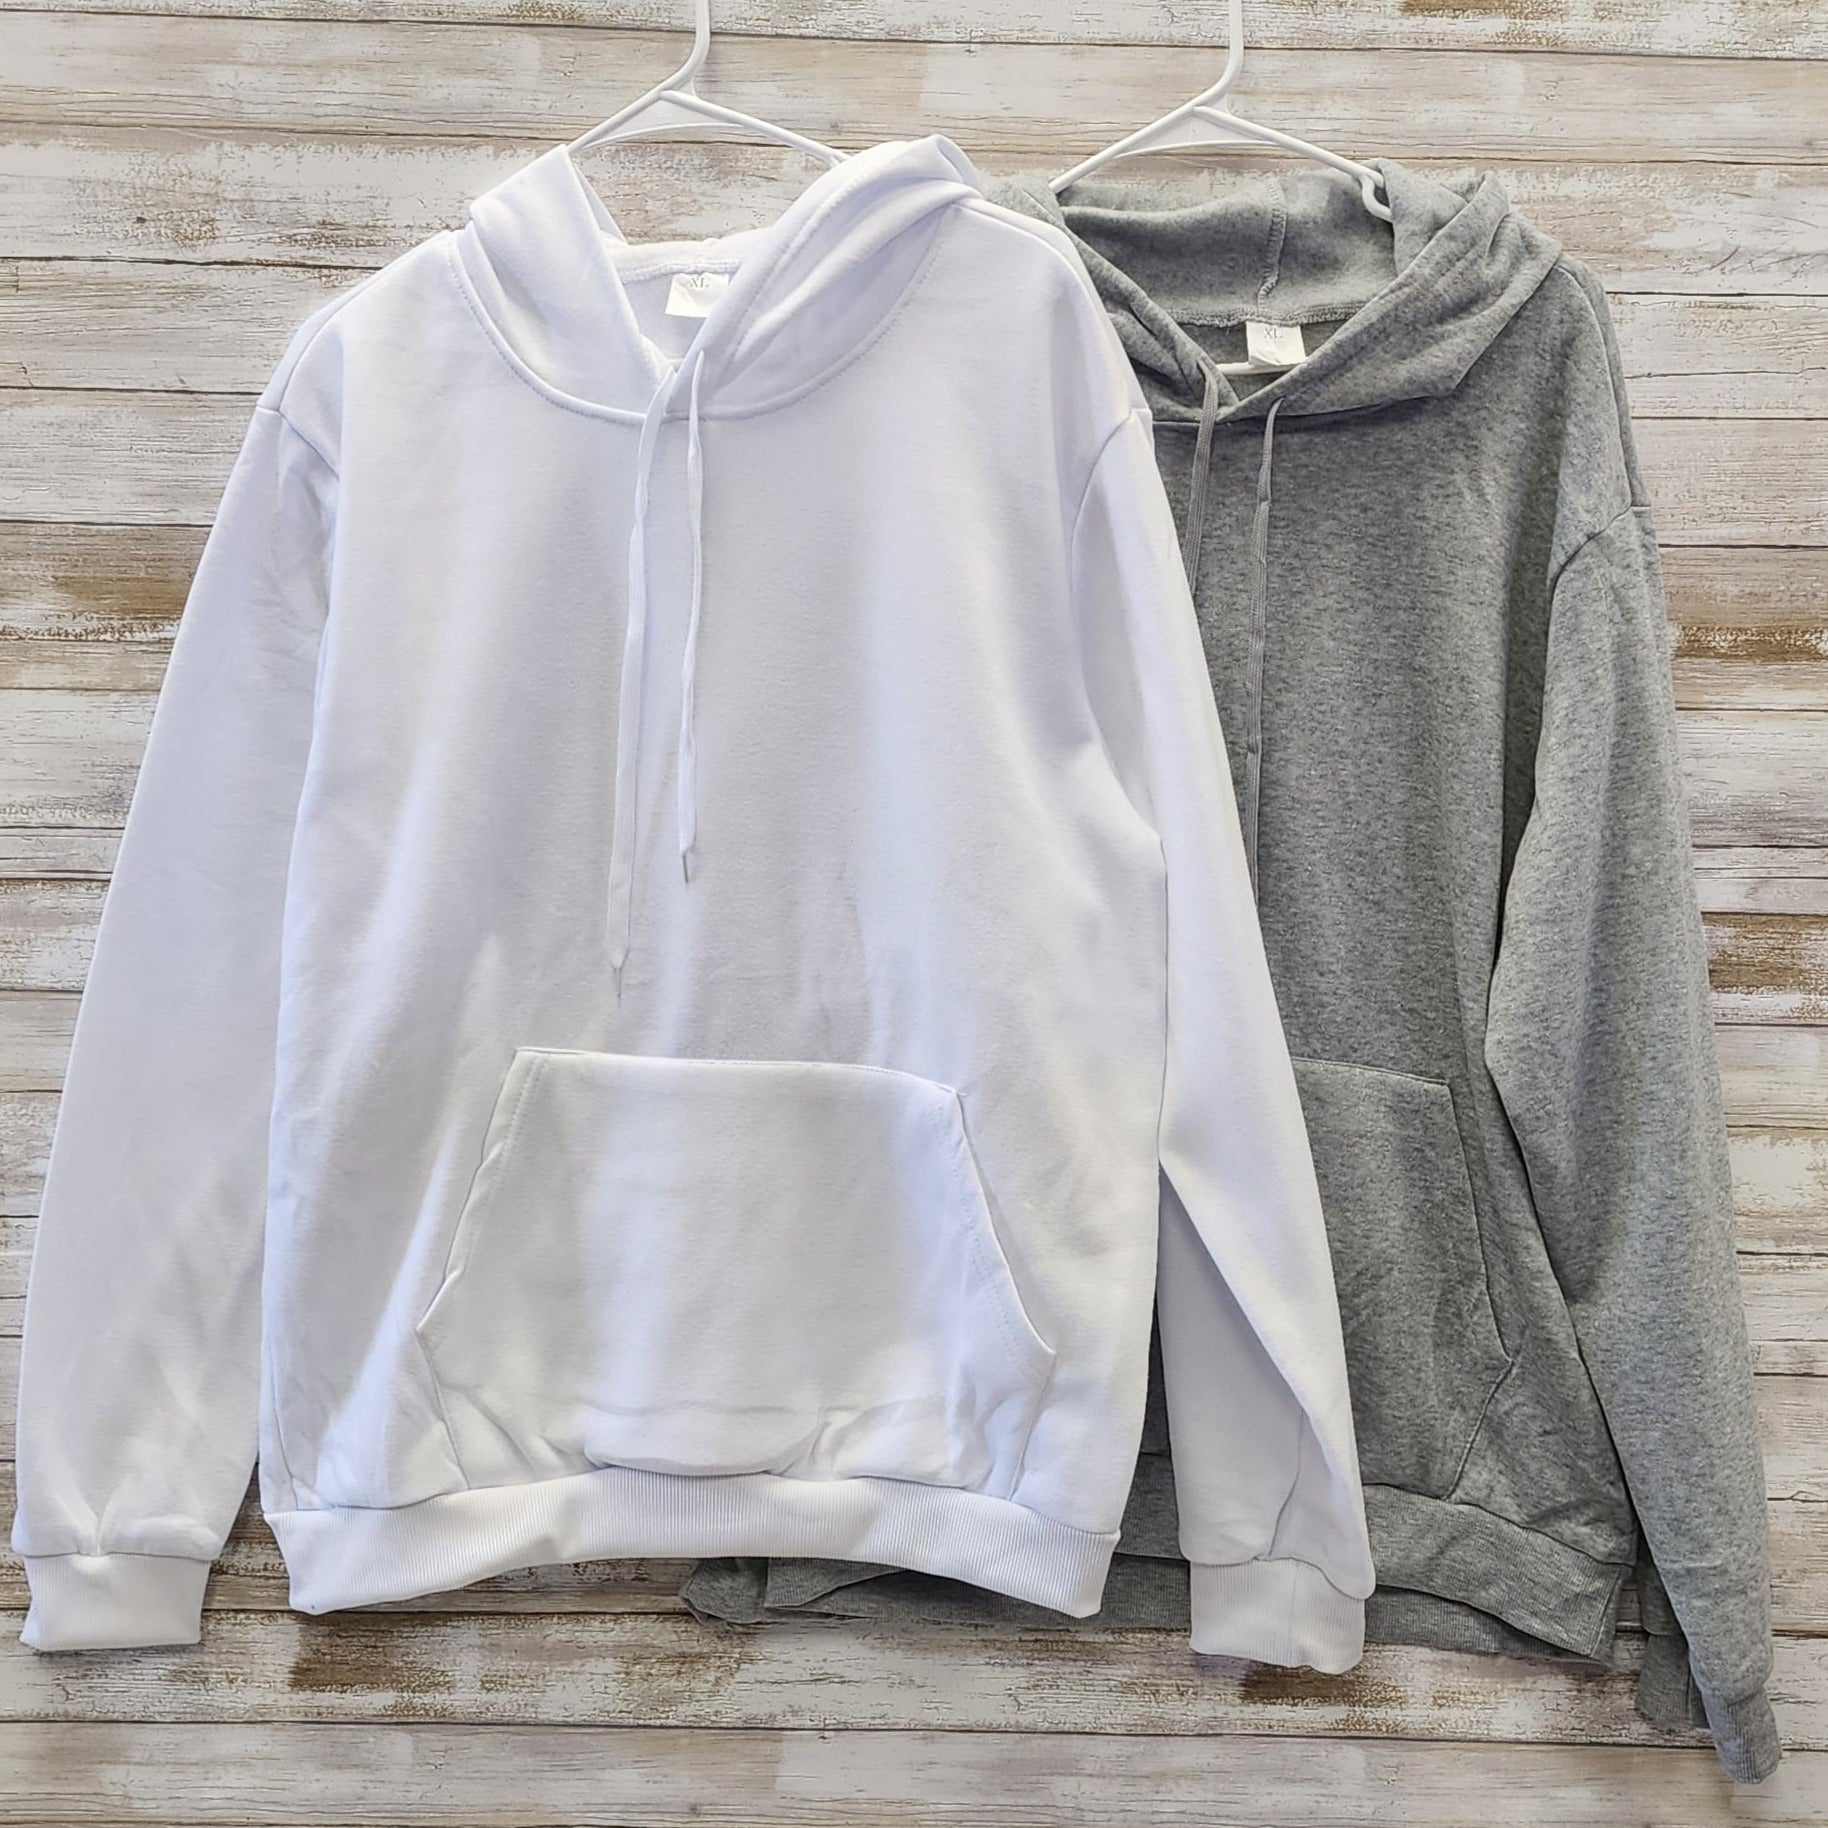 100% Polyester Cotton-feel Hoodie for Sublimation Printing Medium